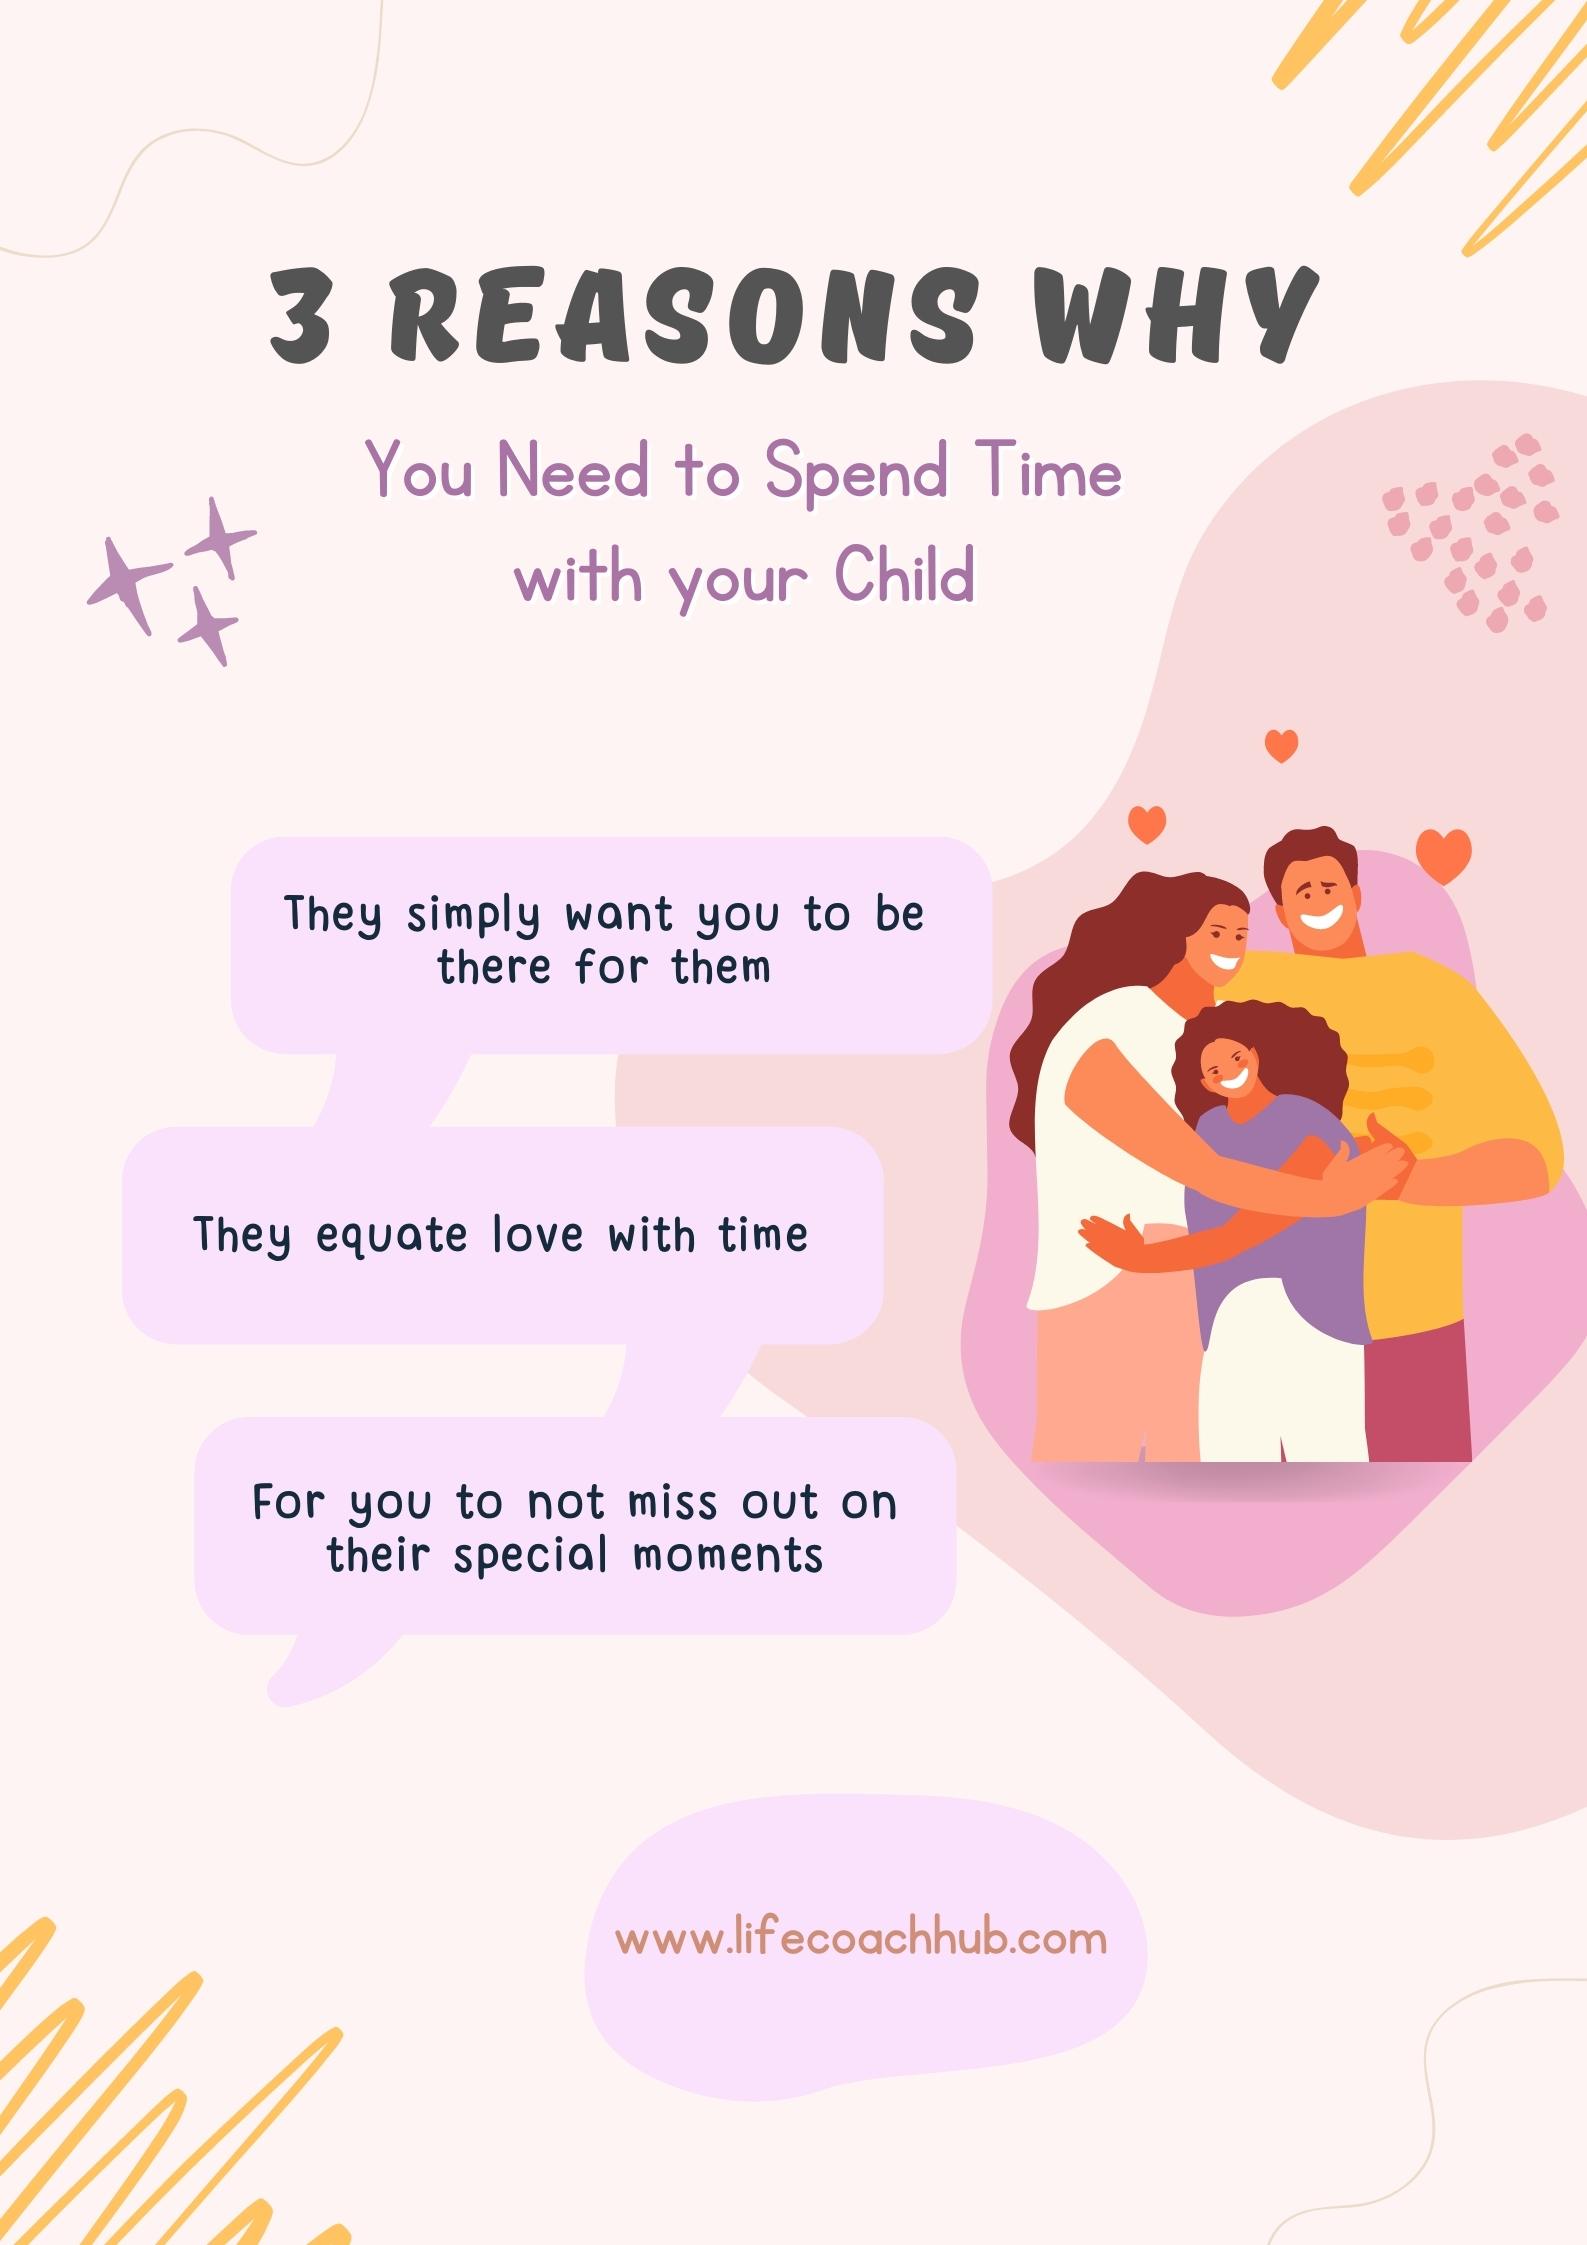 Reasons why you need to spend time with your child